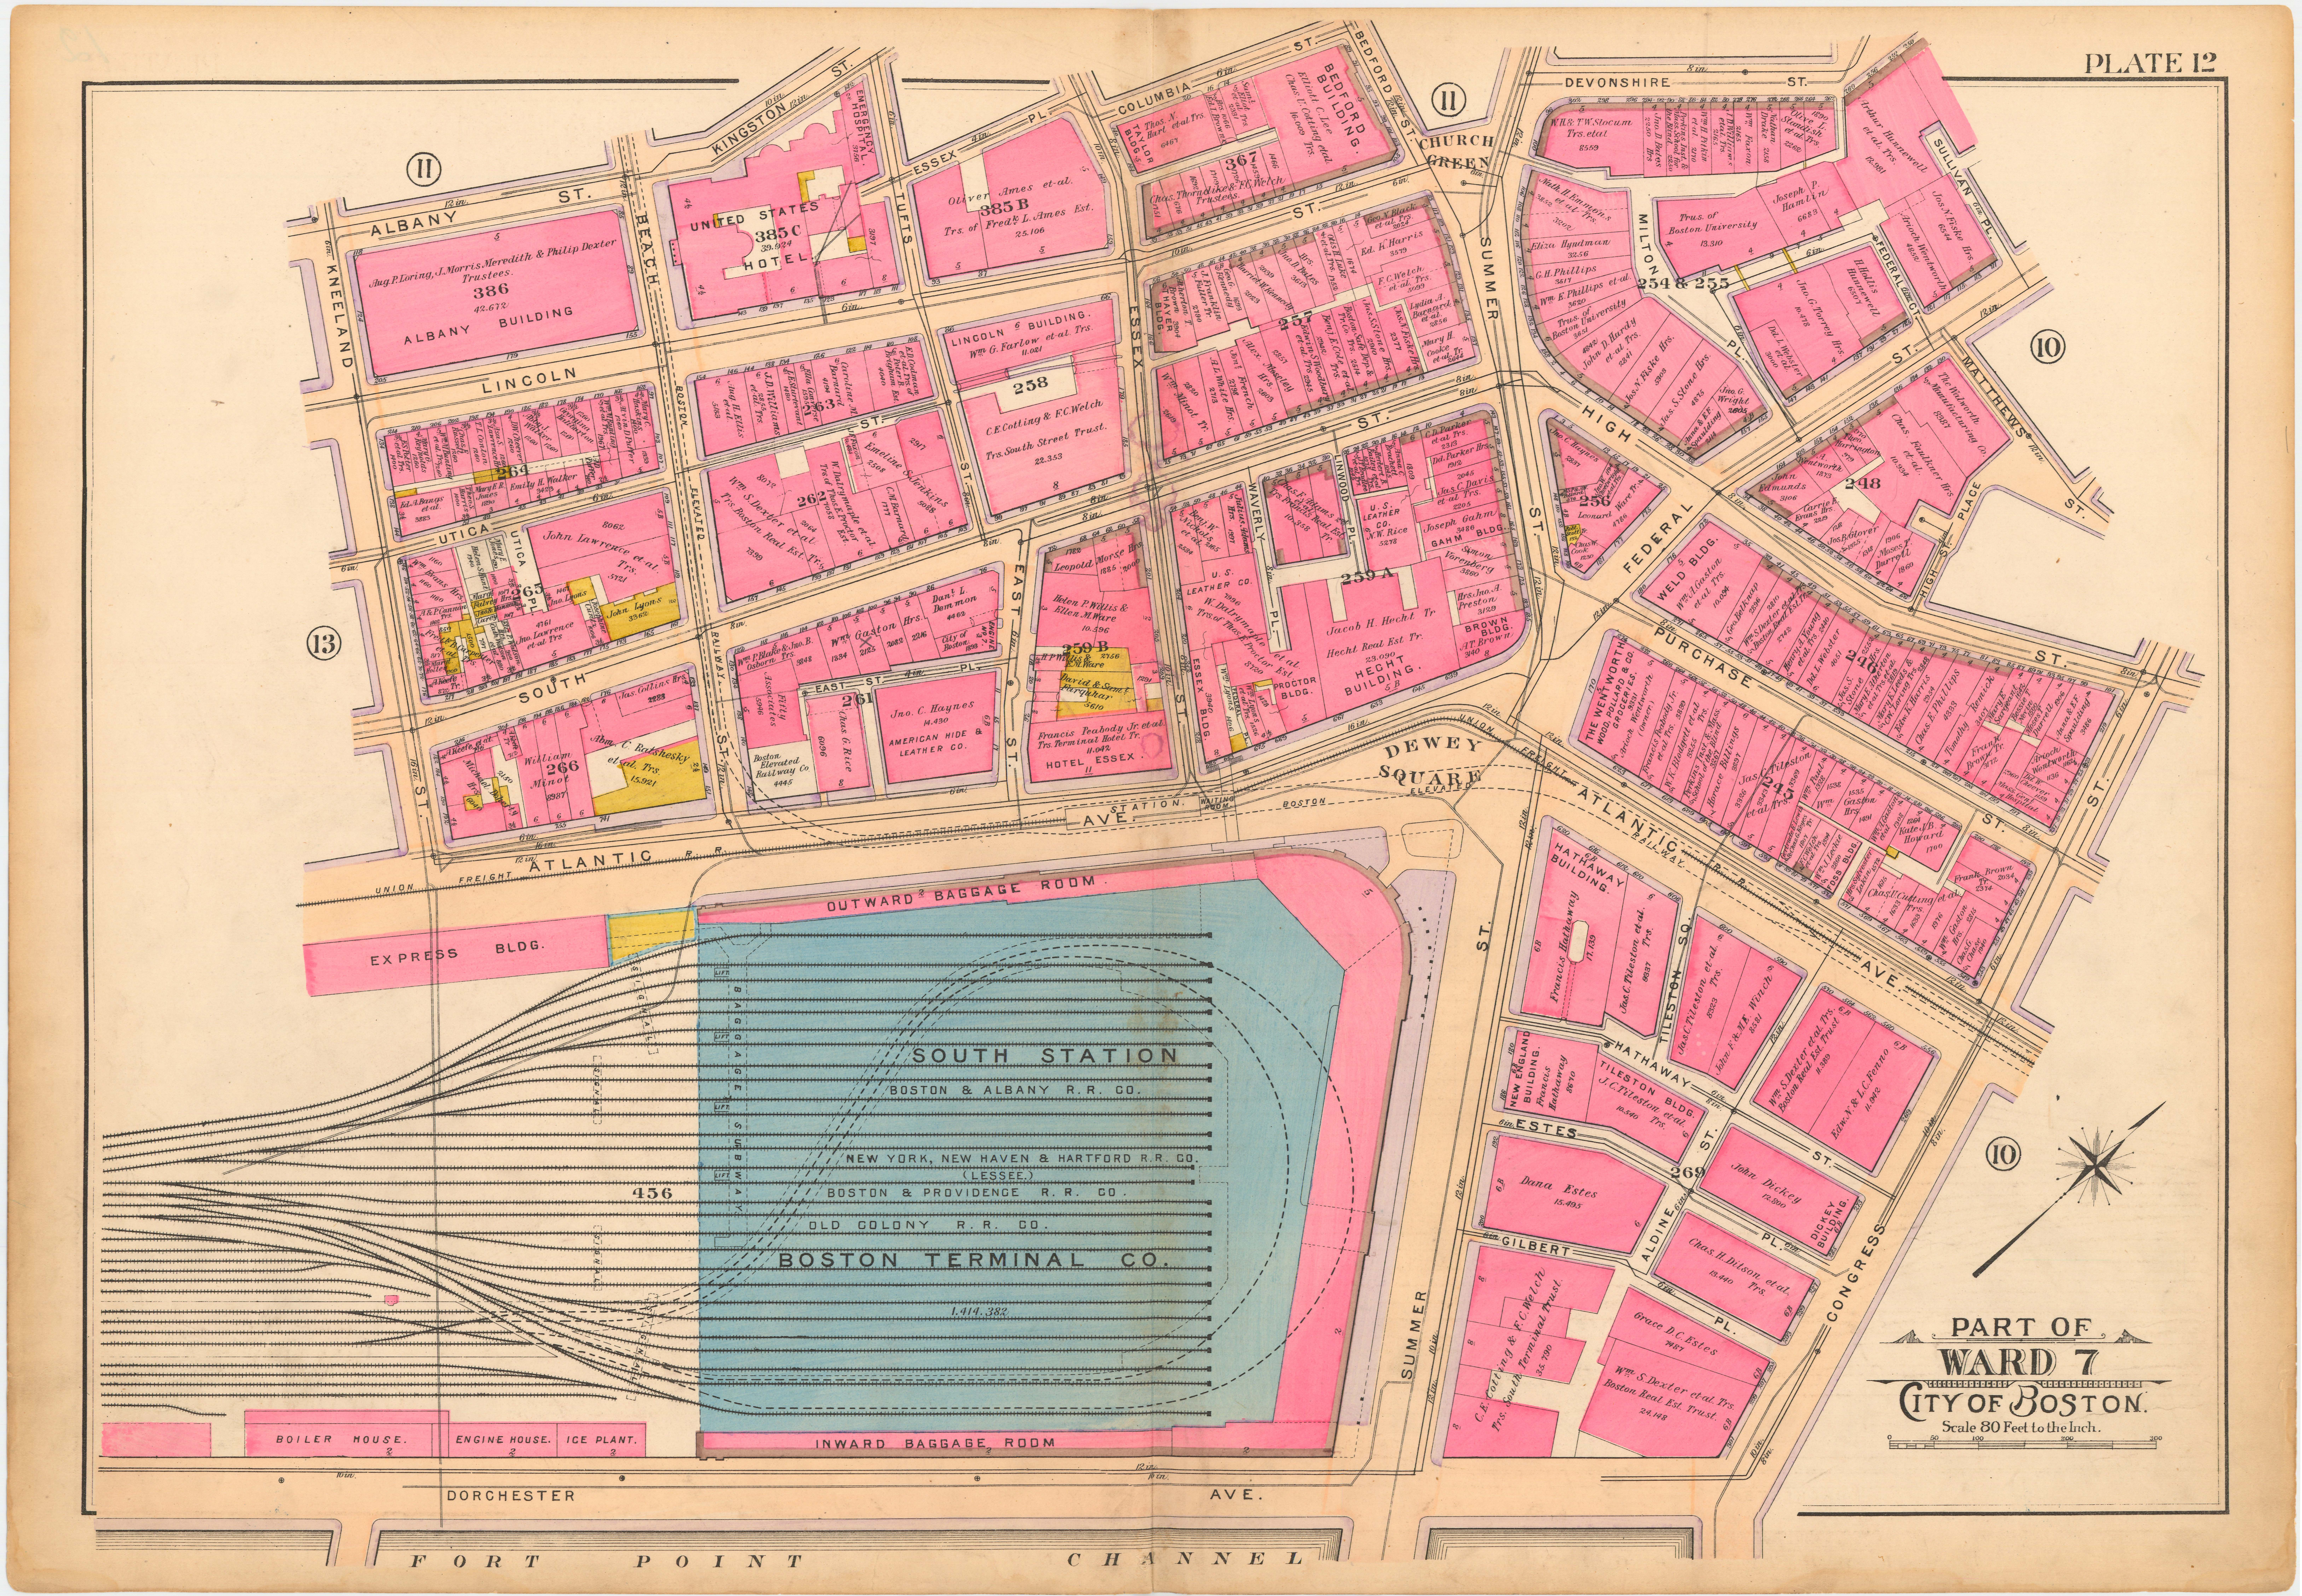 Image of “Plate 12” from “Atlas of the City of Boston: Boston Proper and Back Bay”